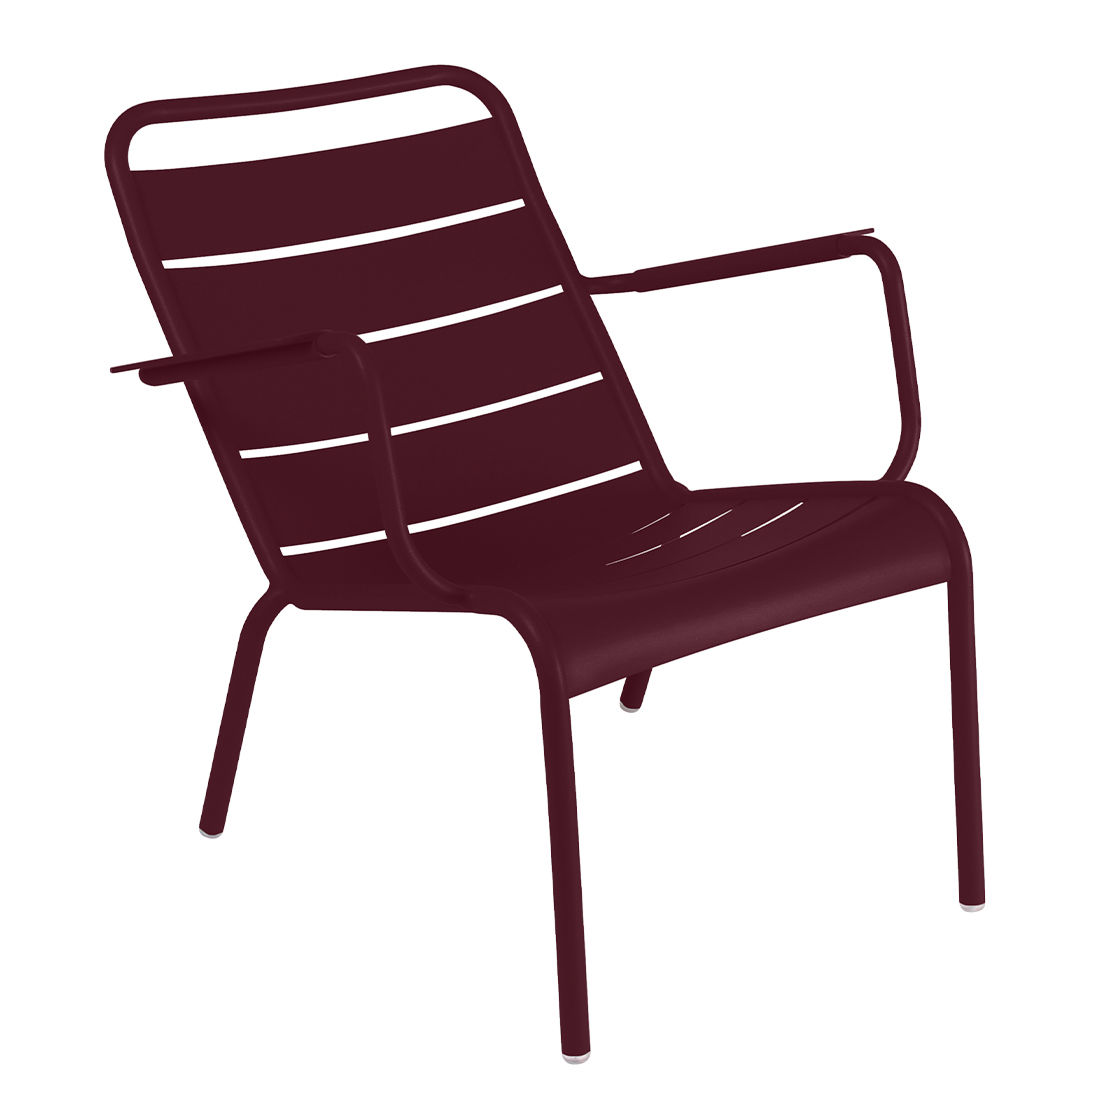 Fauteuil bas Luxembourg Fermob - violet